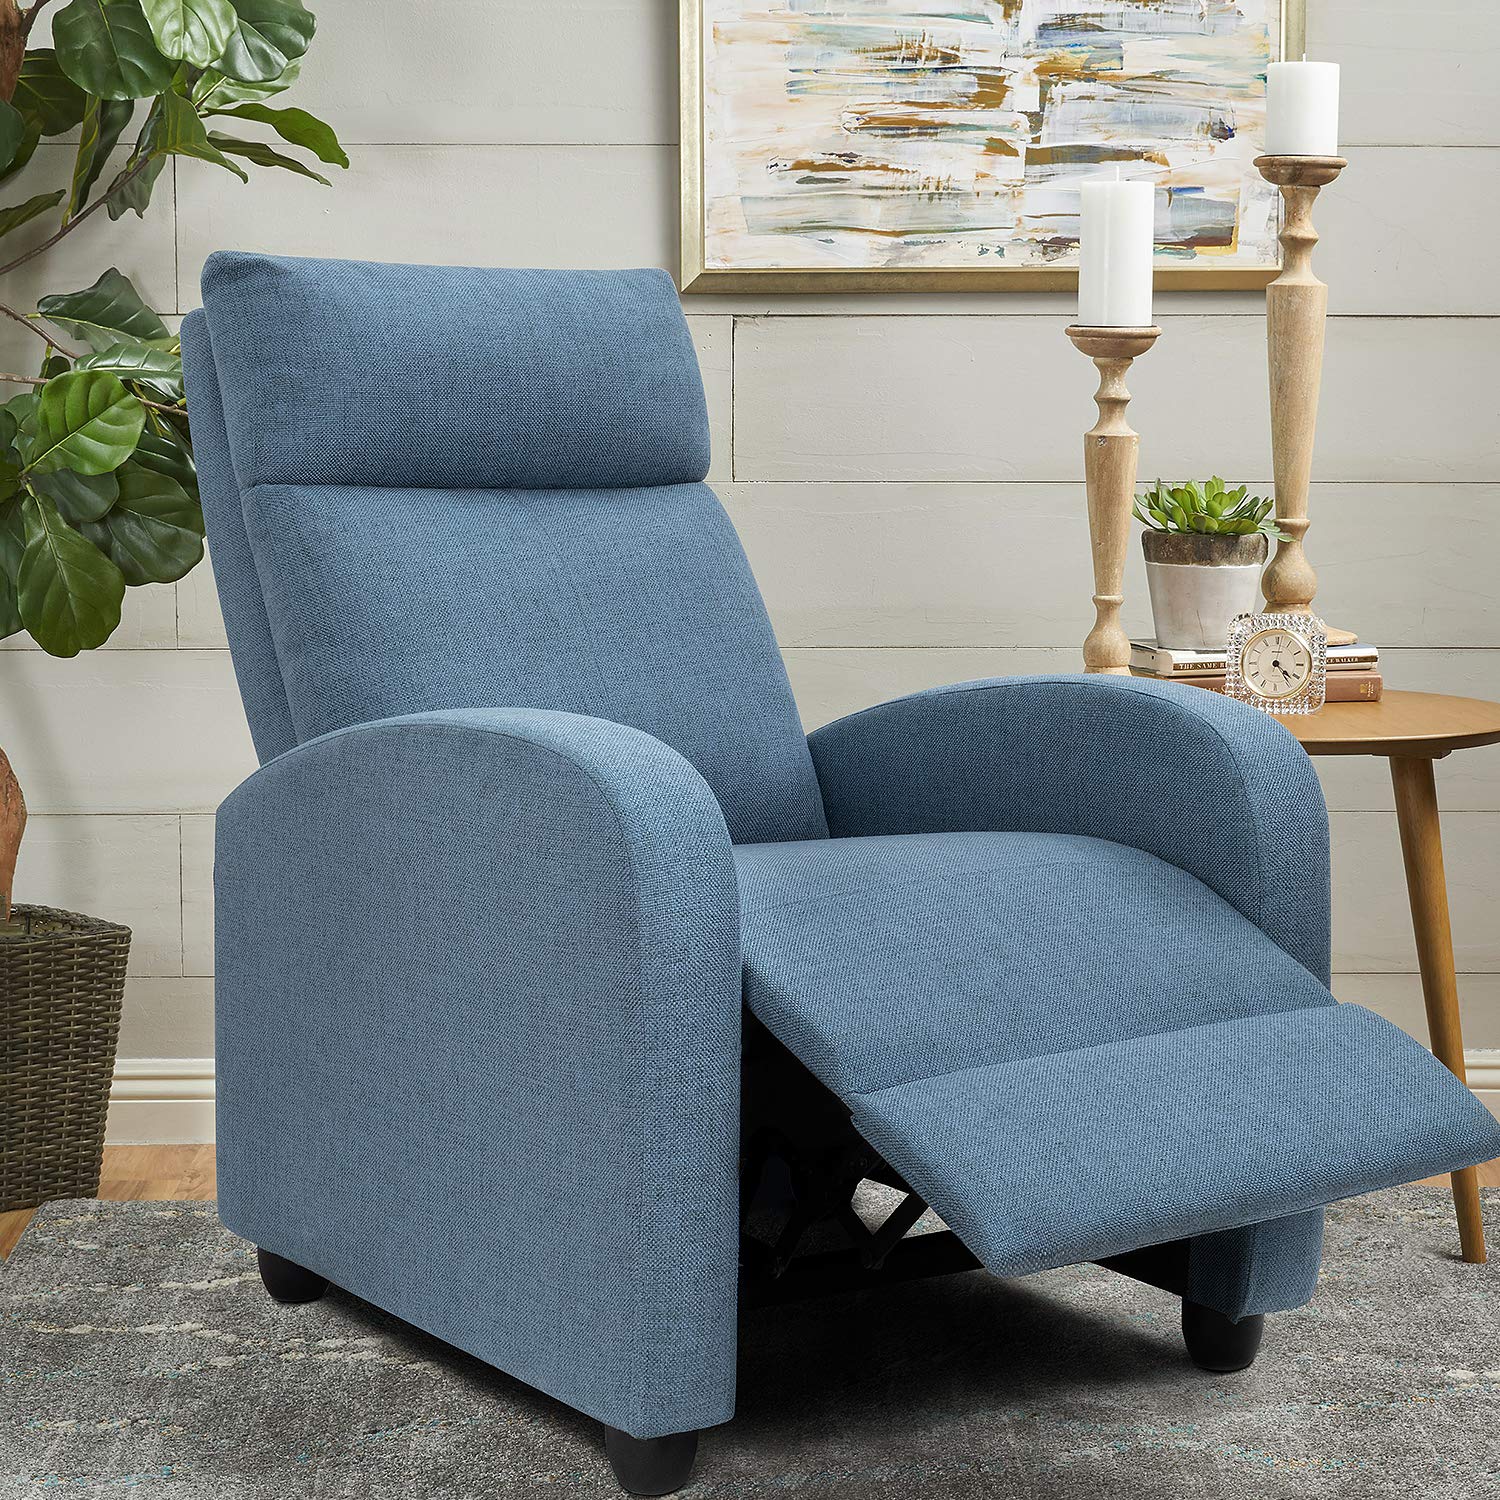 Best Space Saving Recliners 